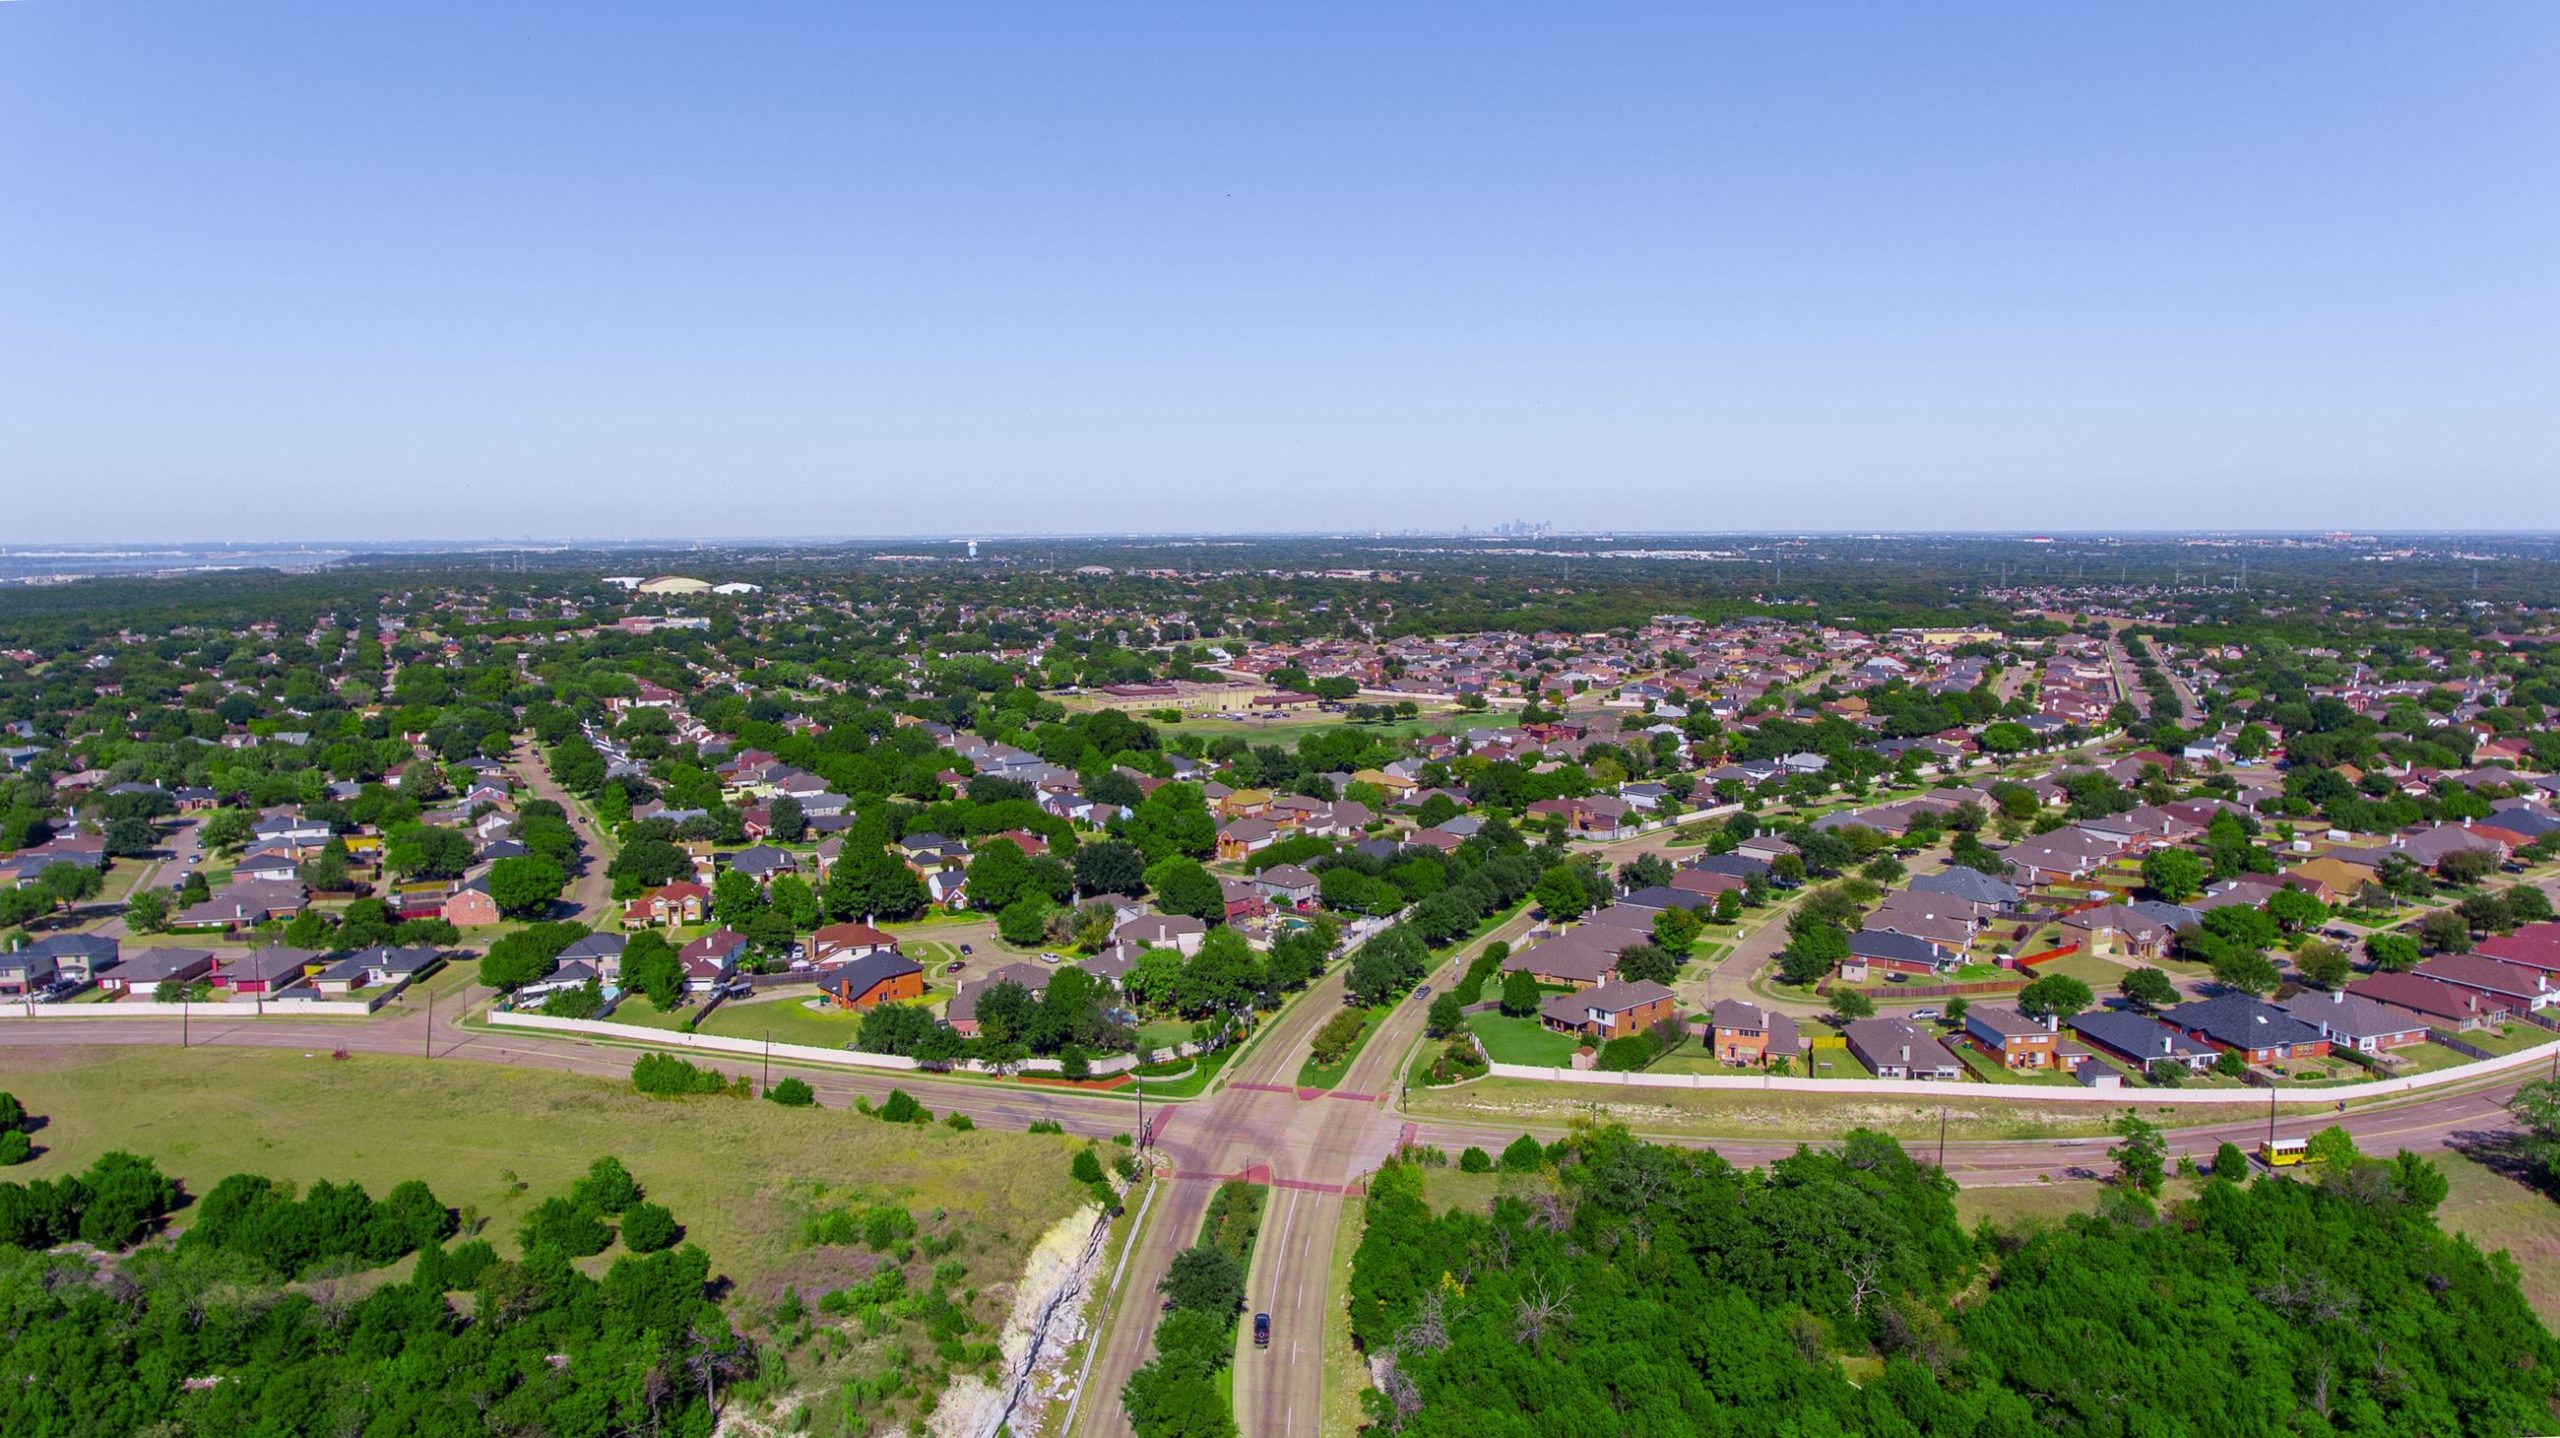 overview of Cedar Hill Texas with various houses and trees